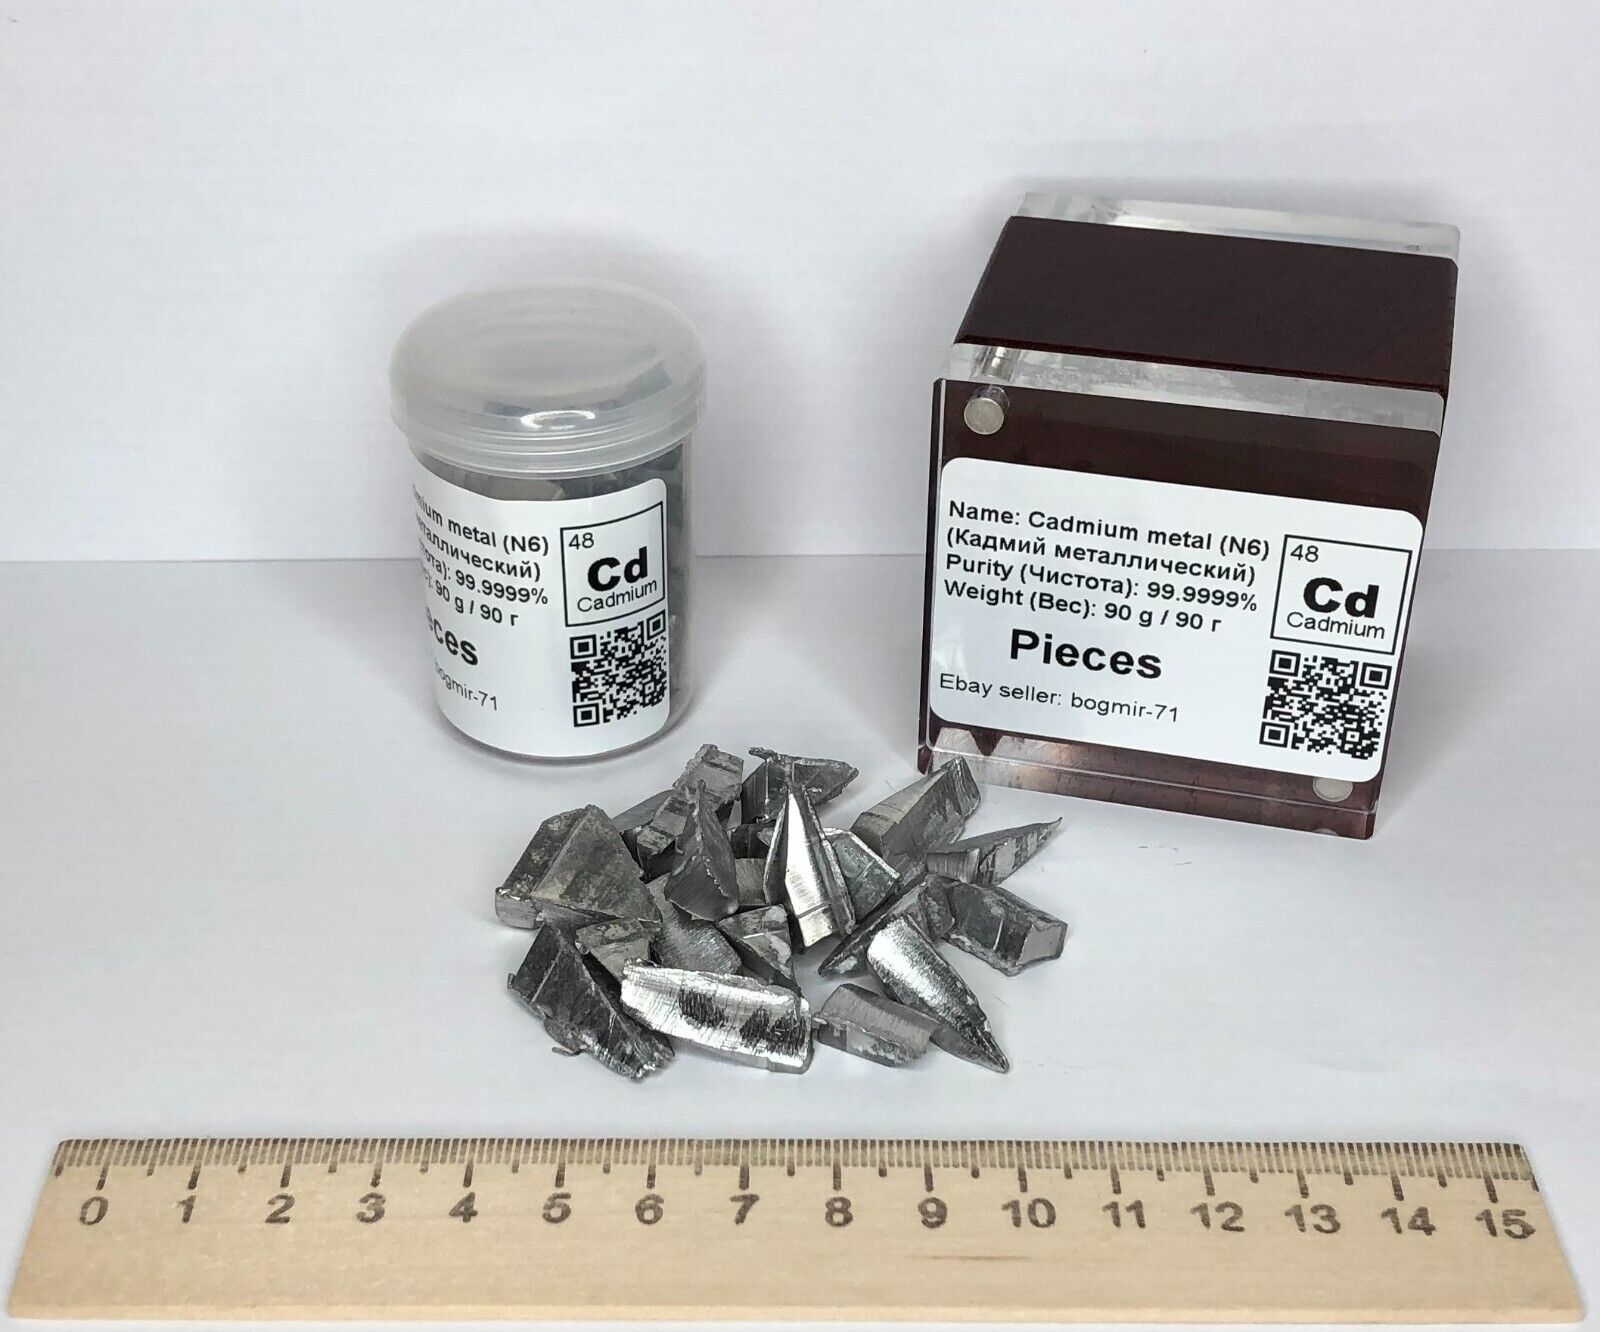 Cadmium Metal 99.9999% Extremely High Purity Periodic Element 90 Grams Pieces